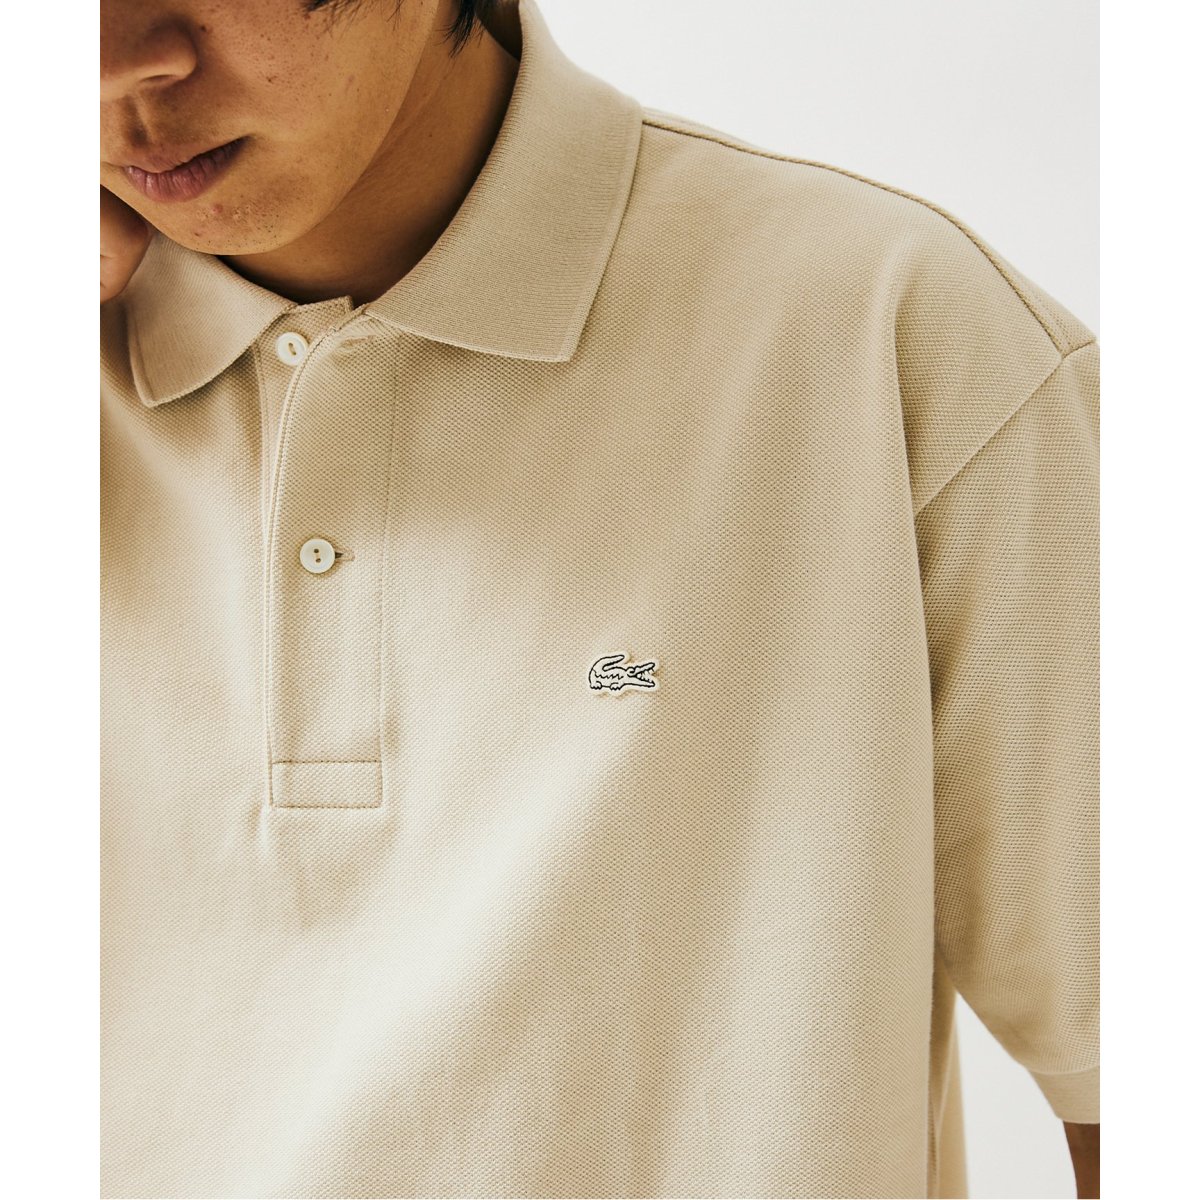 LACOSTE for JOURNAL STANDARD / ラコステ】別注 ヘビー ピケ ポロシ